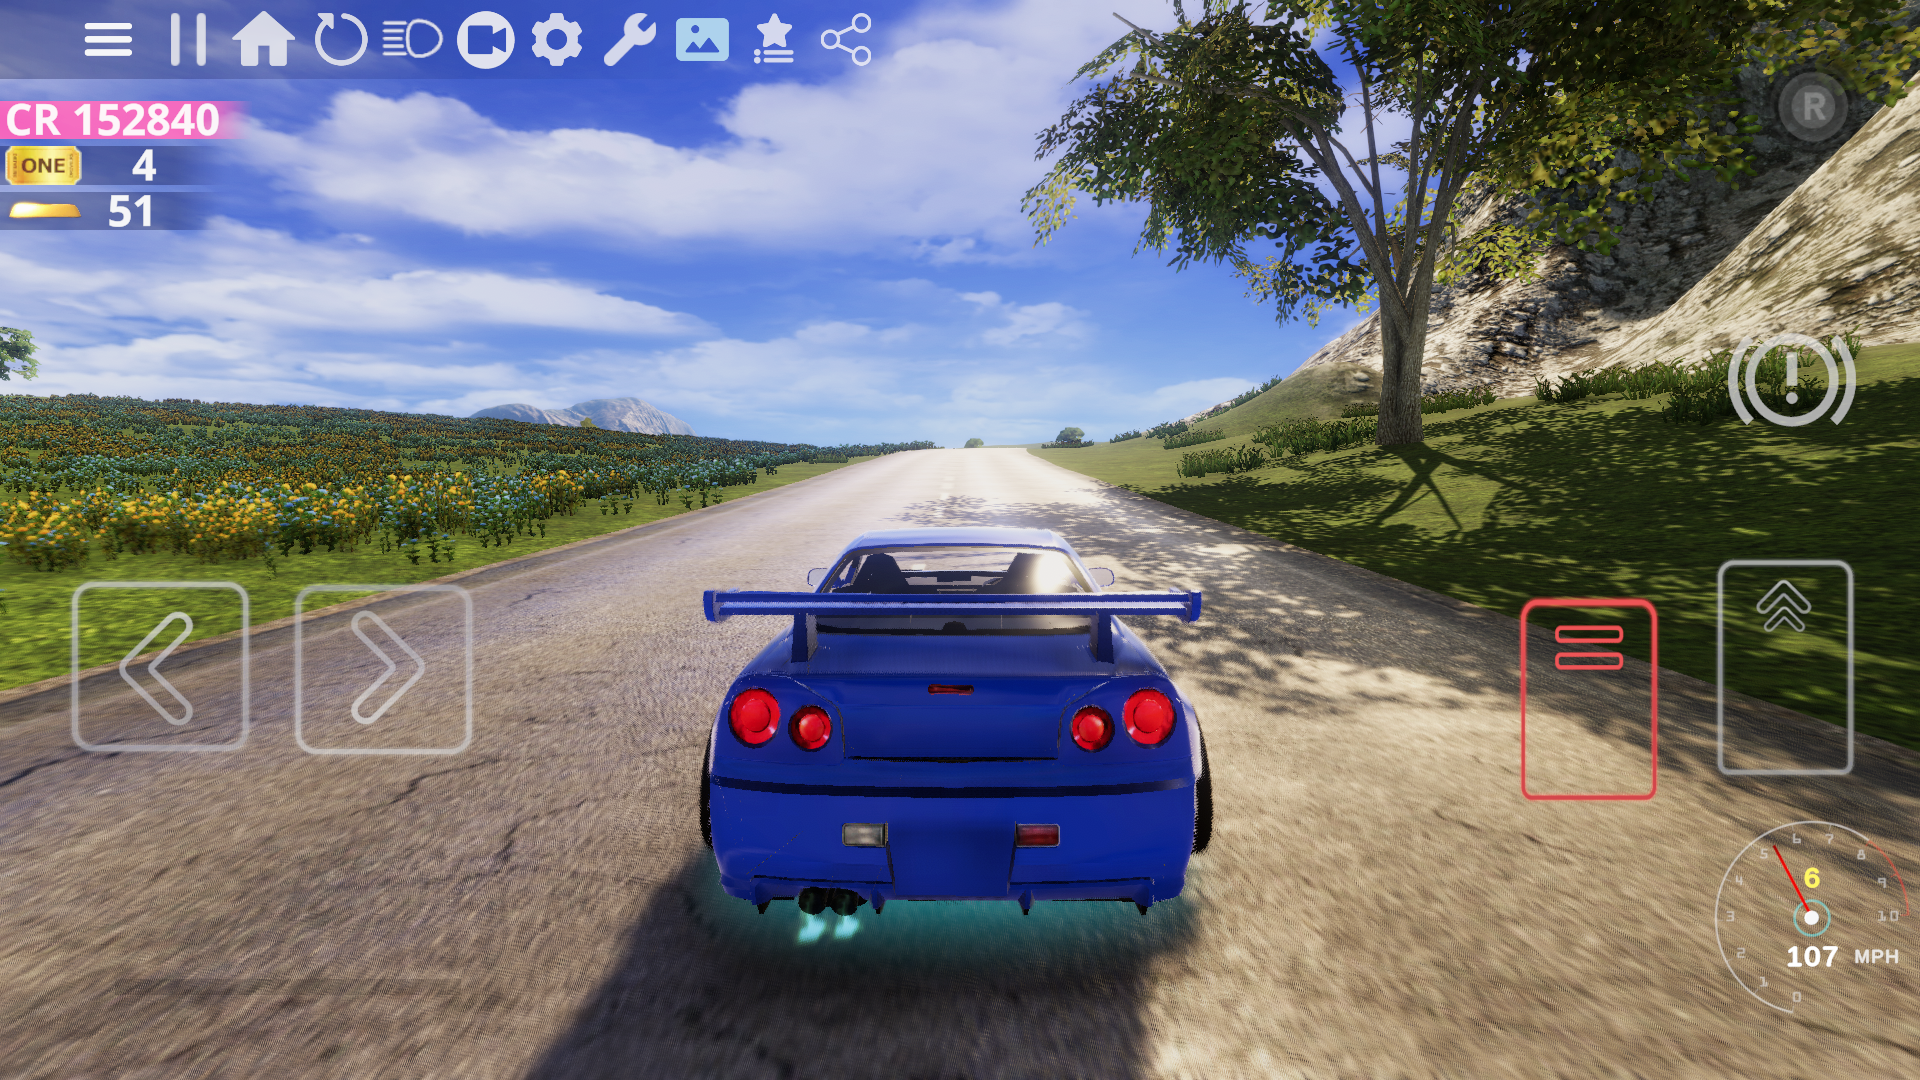 Free Forza Horizon 3 game android 1 APK Download For Android